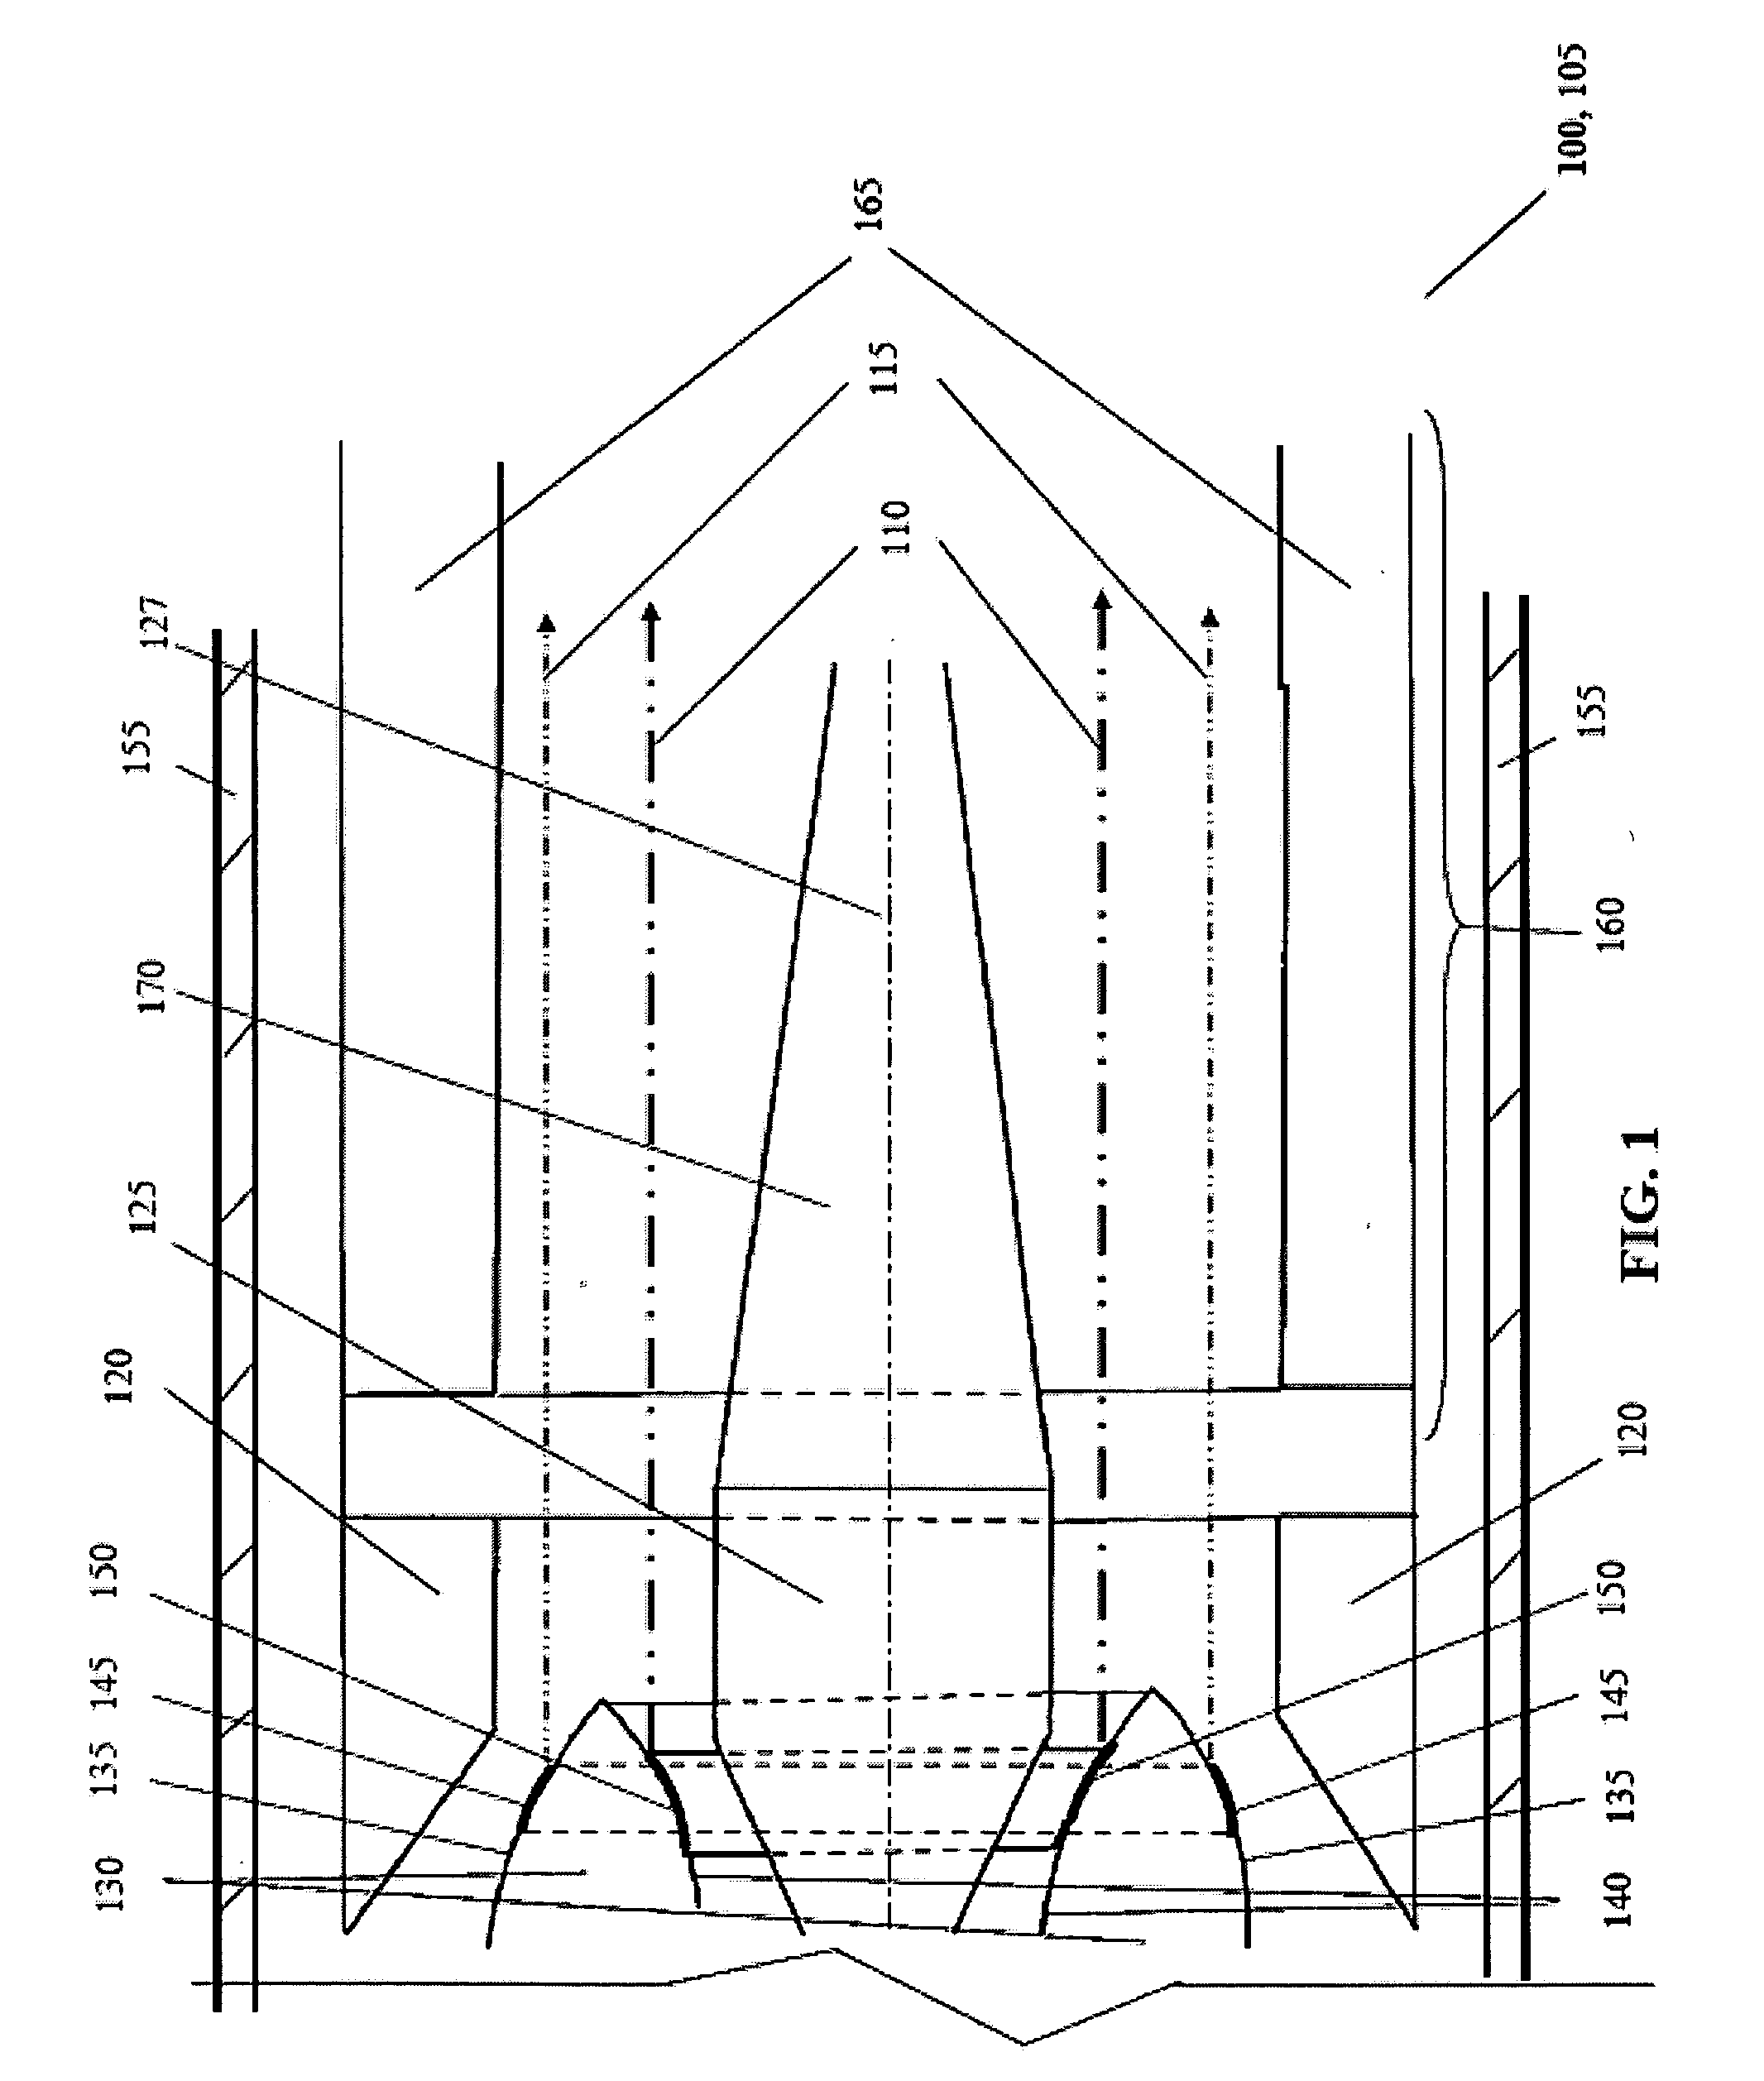 Coaxial cavity gyrotron with two electron beams